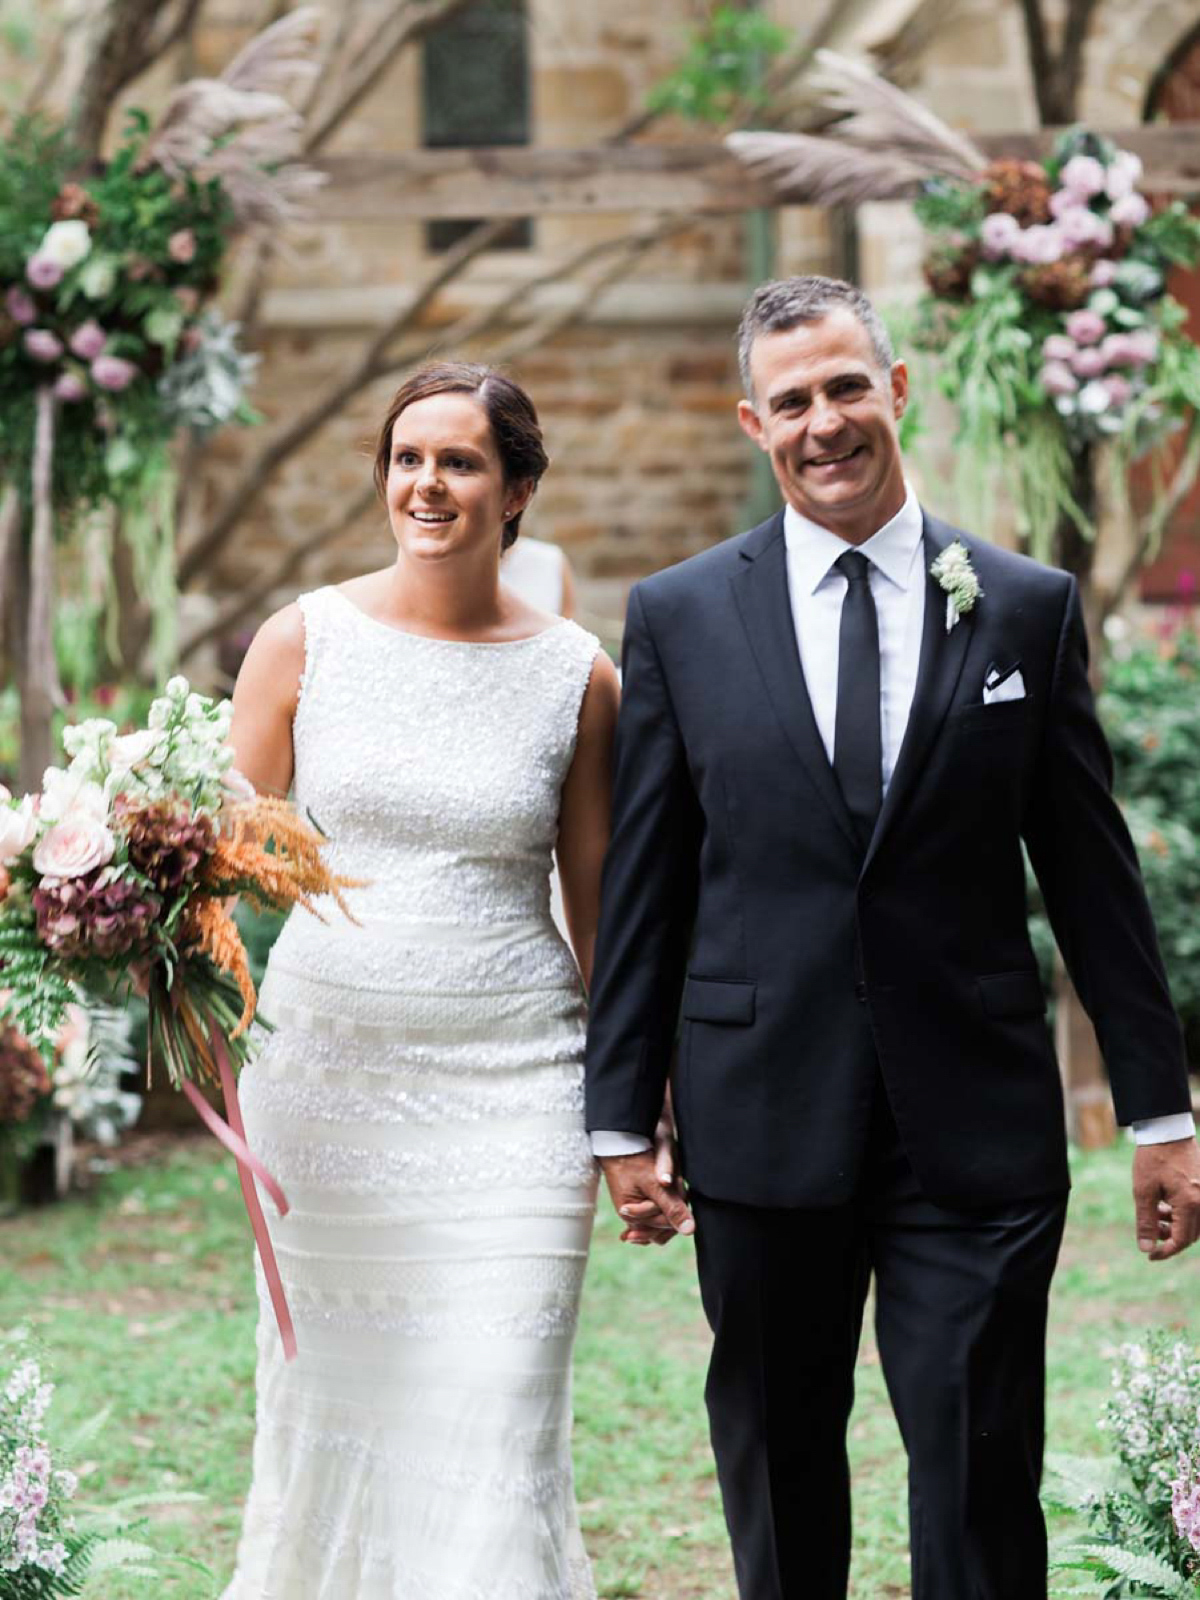 Rebecca wore a Karen Willis Holmes gown for her relaxed and romantic outdoor garden wedding in Australia. Photography by Mr Edwards.